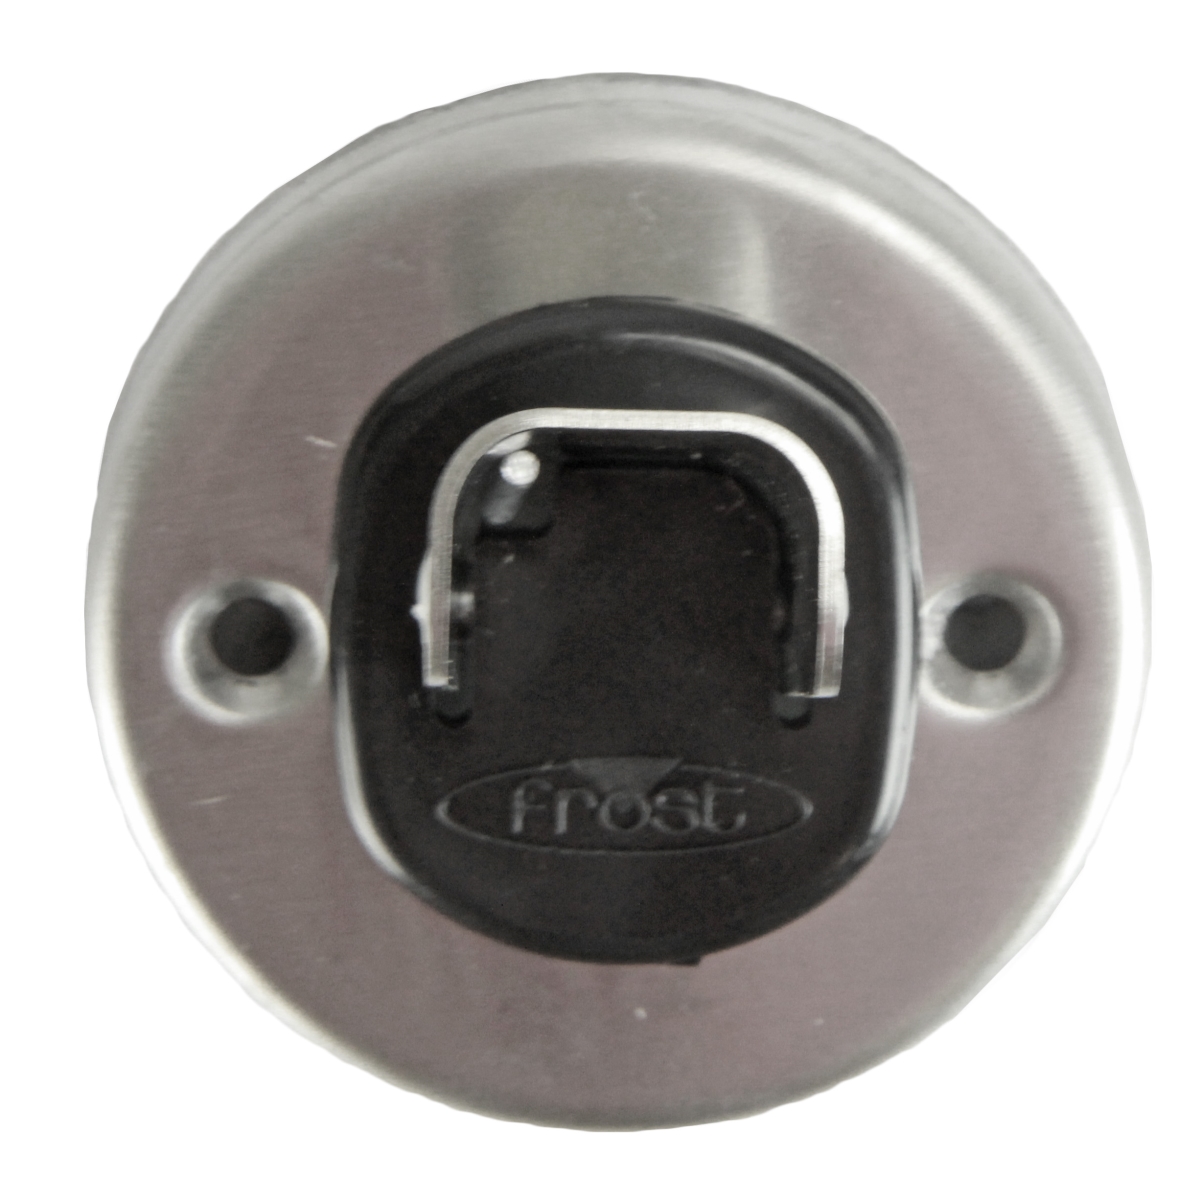 1150-ss Stainless Steel Safety Coat Hook